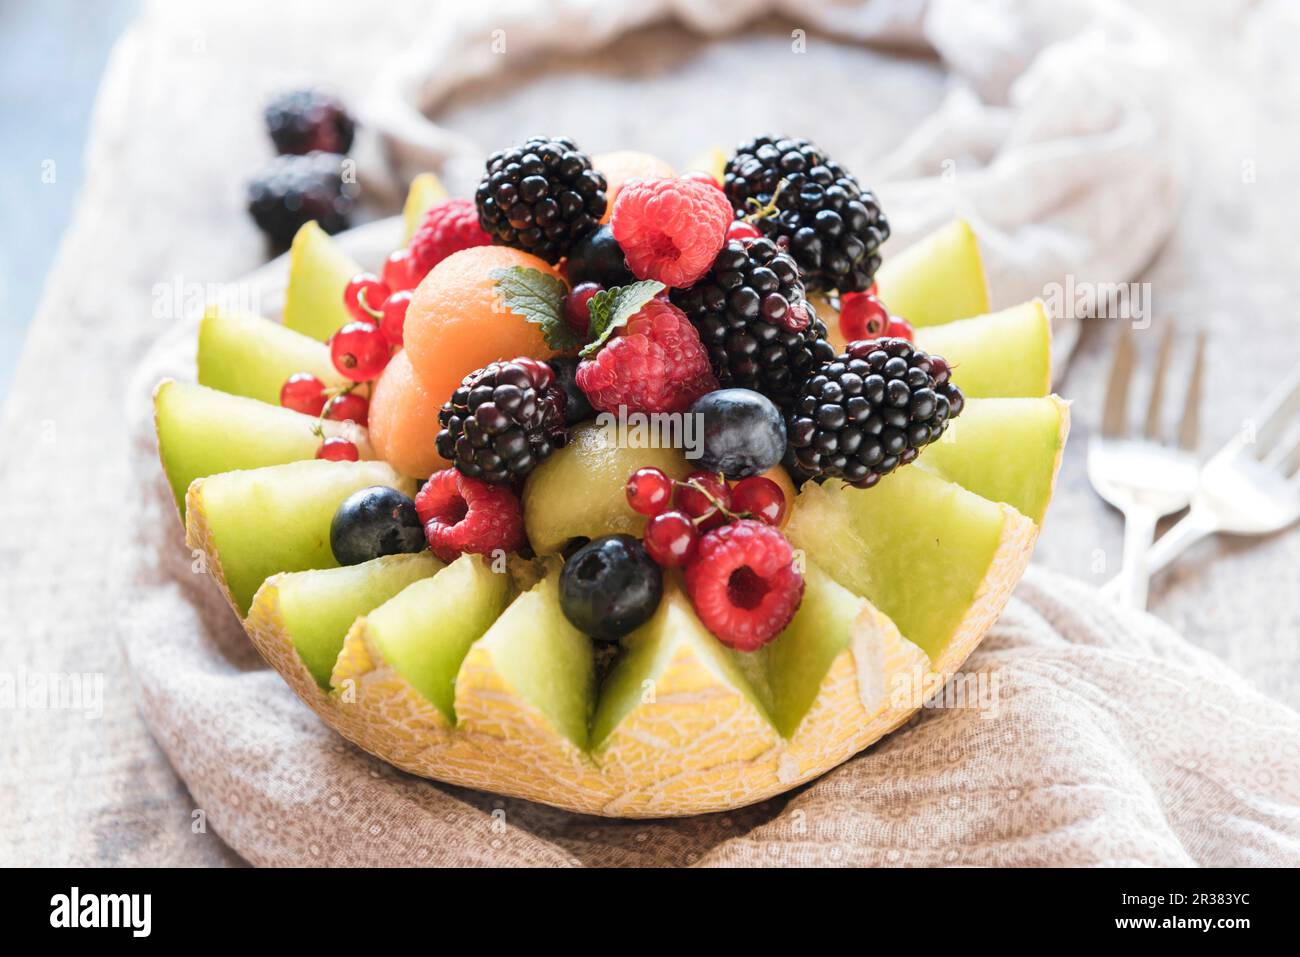 A halved melon filled with melon balls and fresh berries Stock Photo